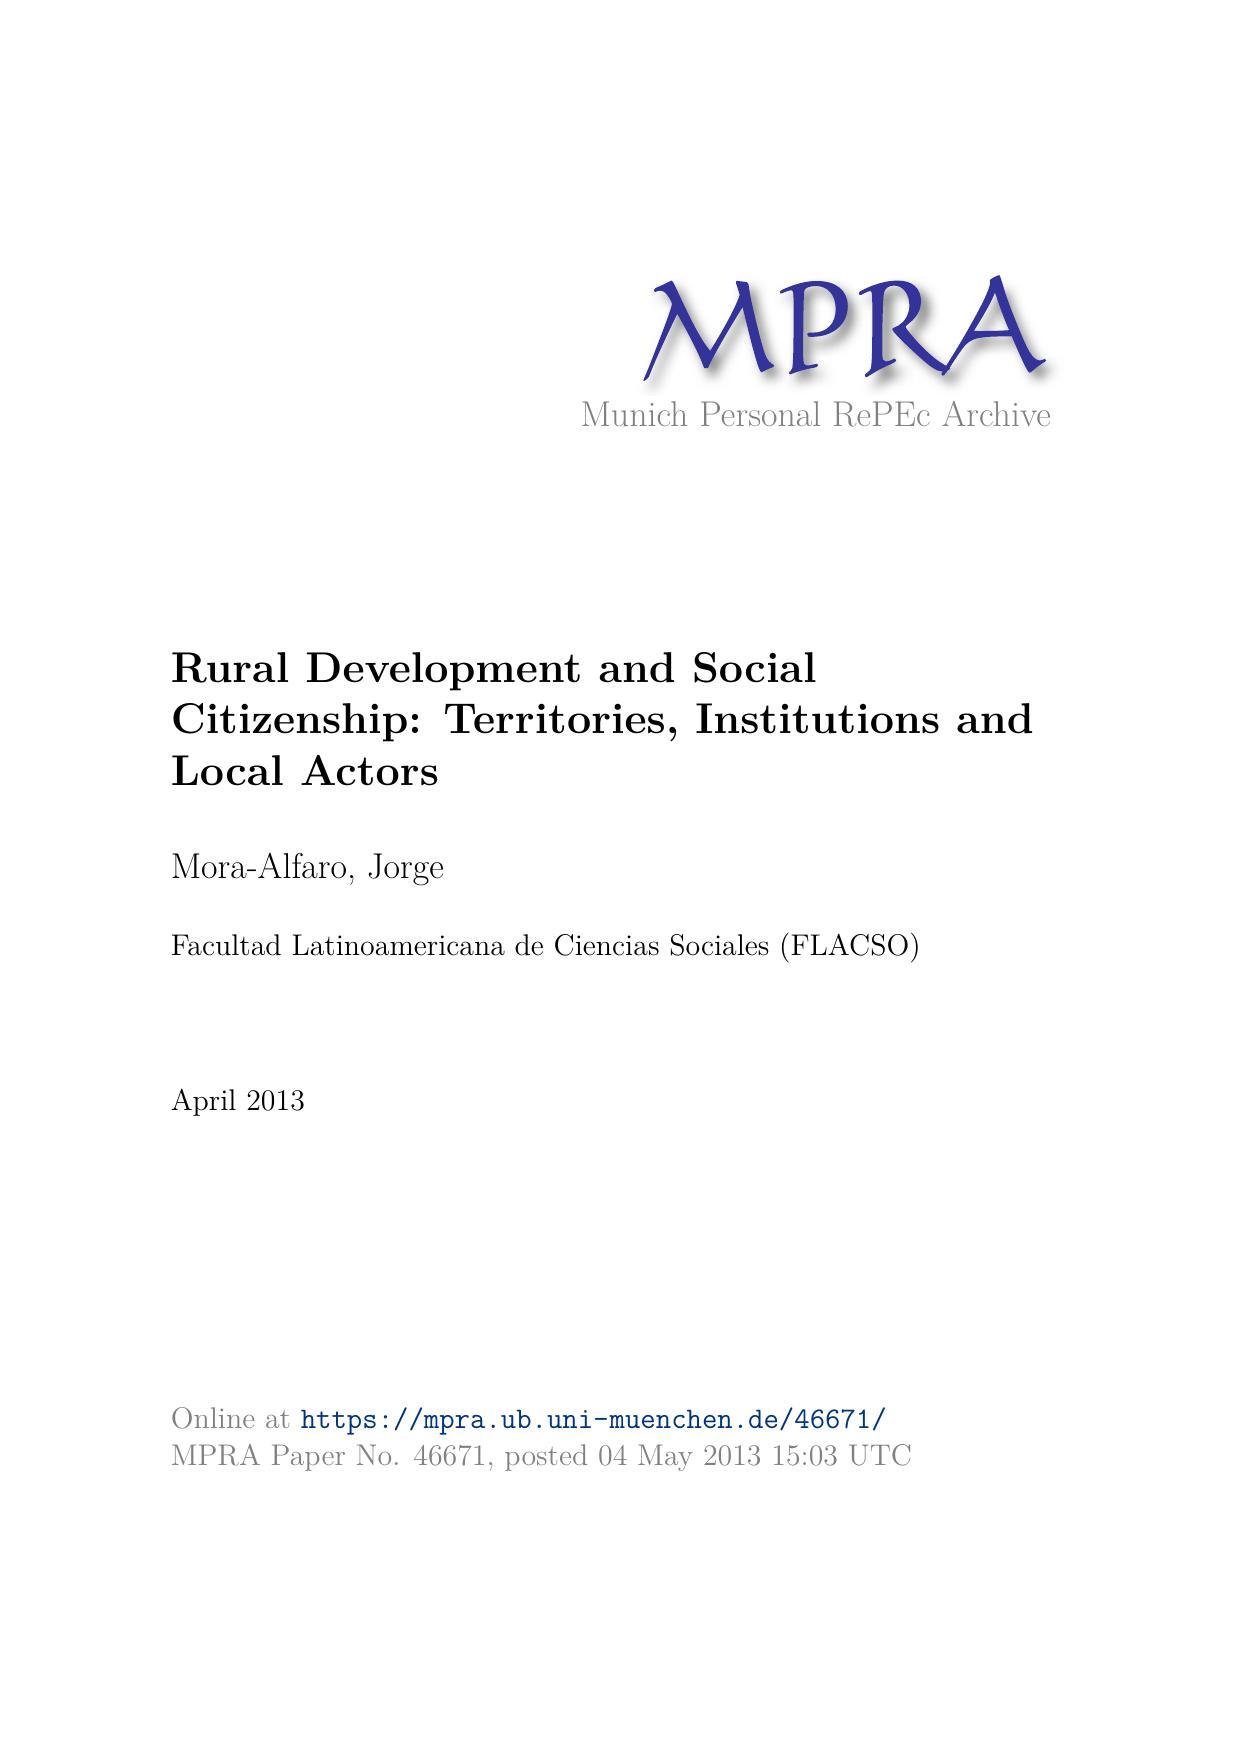 Rural Development and Social Citizenship Territories, Institutions and Local Actors 2013